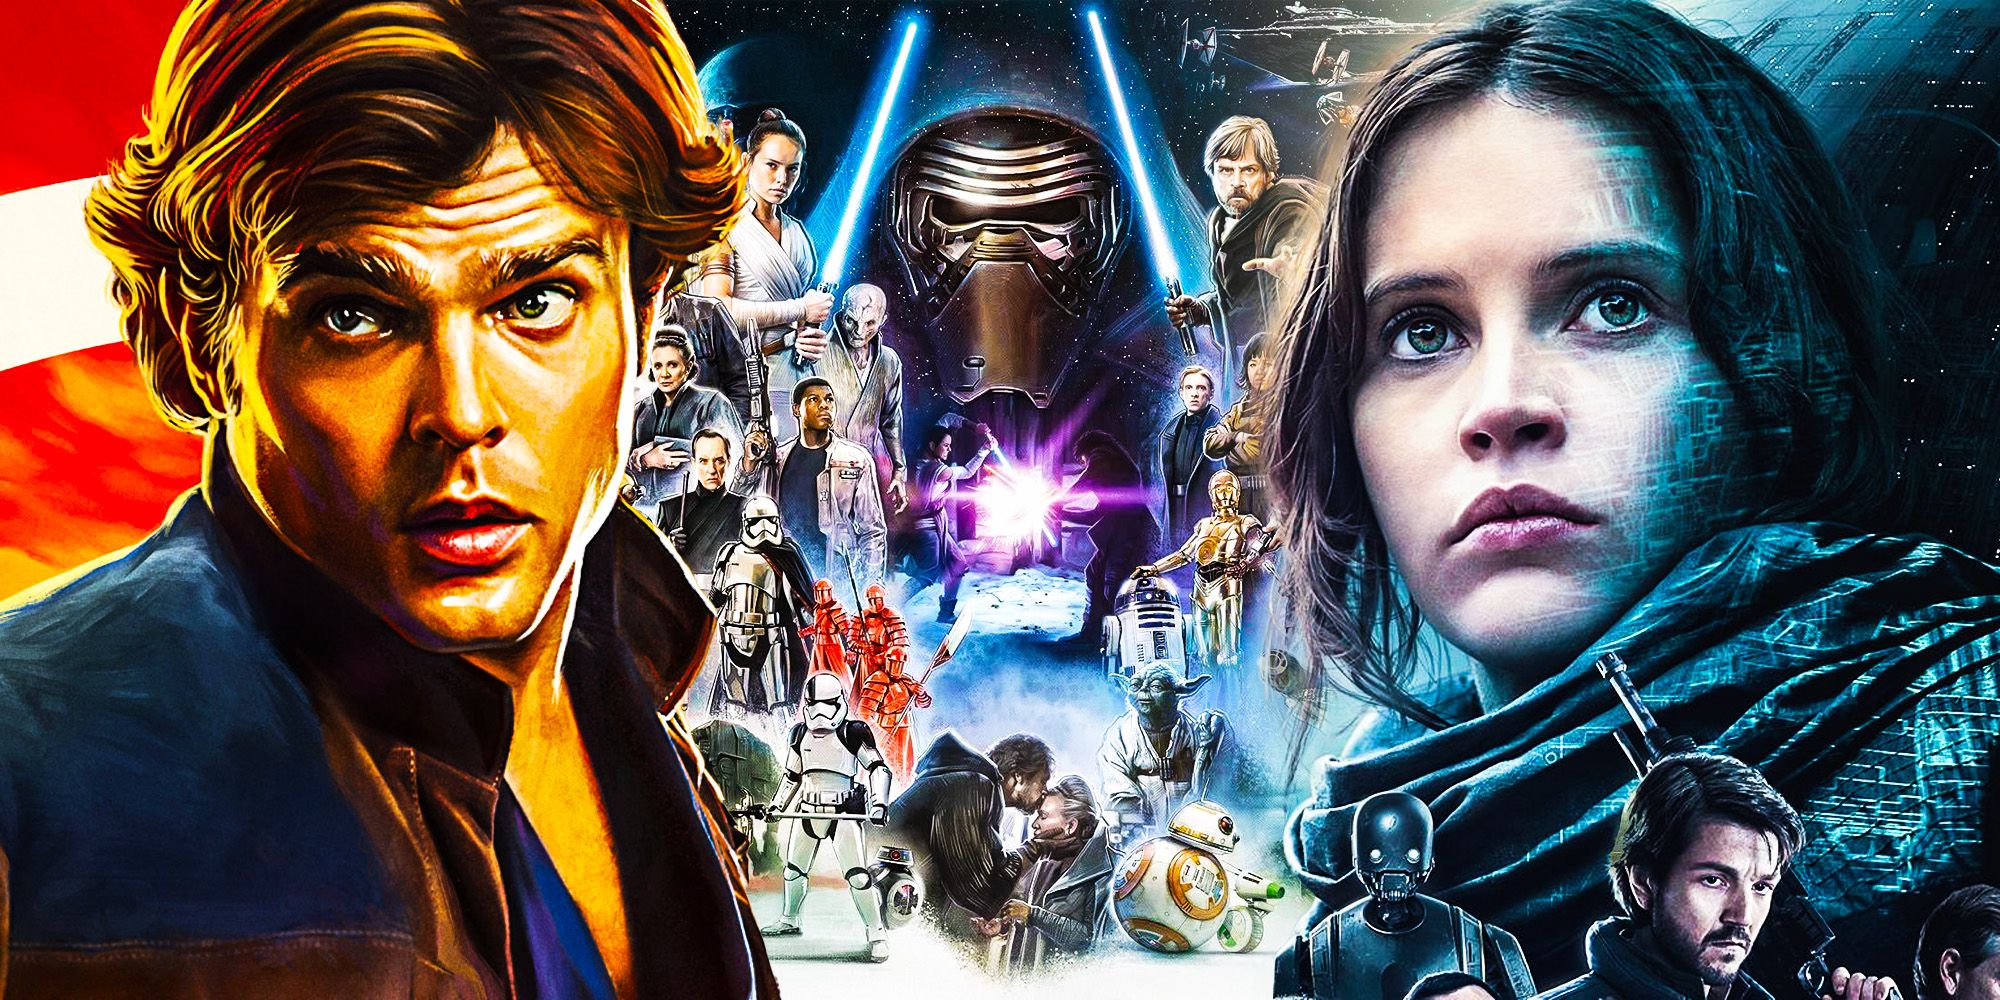 The Star Wars Sequels Should have Happened AFTER The Spin-Offs